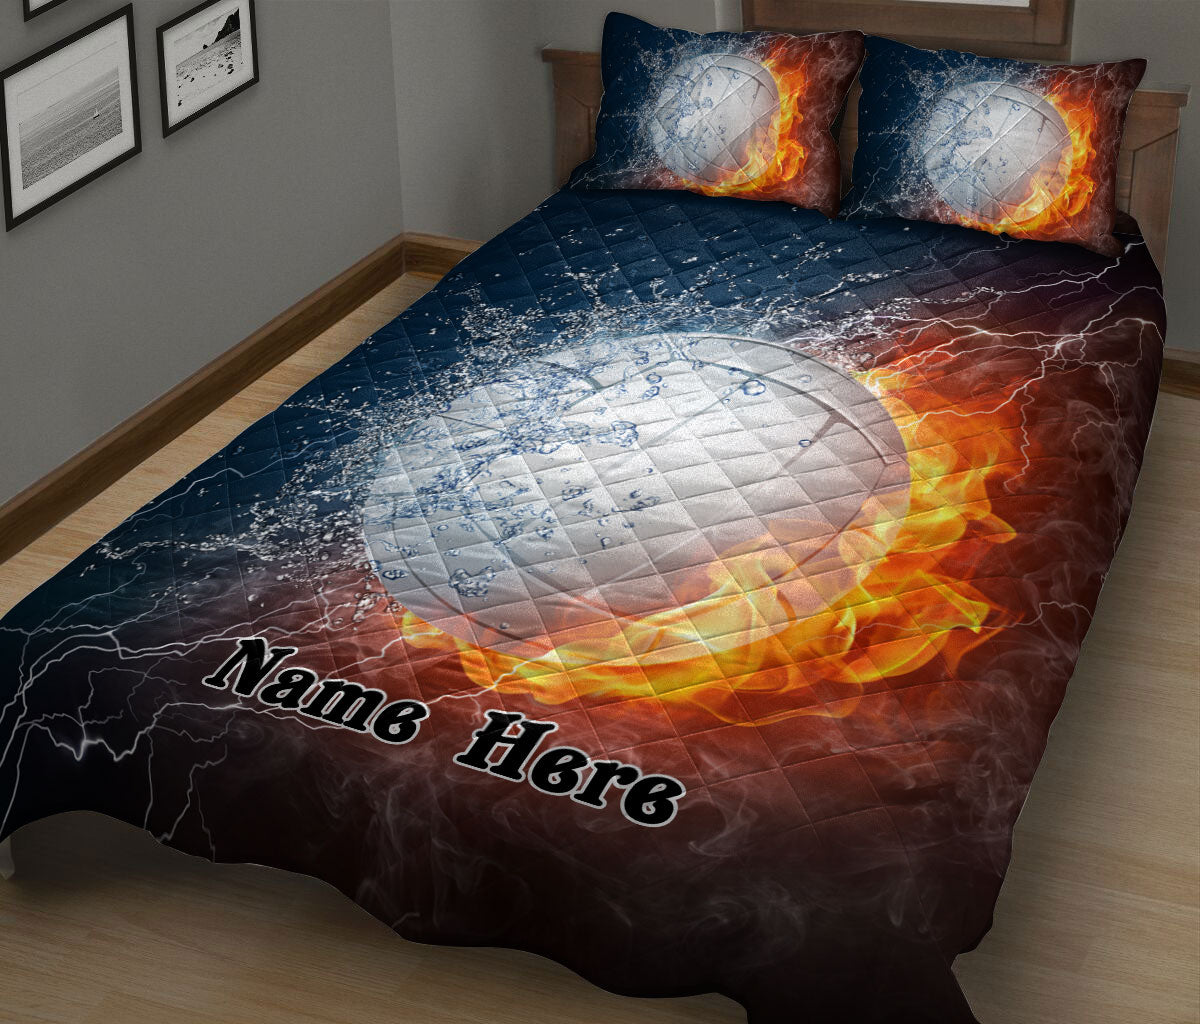 Ohaprints-Quilt-Bed-Set-Pillowcase-White-Volleyball-Fire-&-Water-Unique-Sports-Gift-Idea-Custom-Personalized-Name-Blanket-Bedspread-Bedding-1515-King (90'' x 100'')